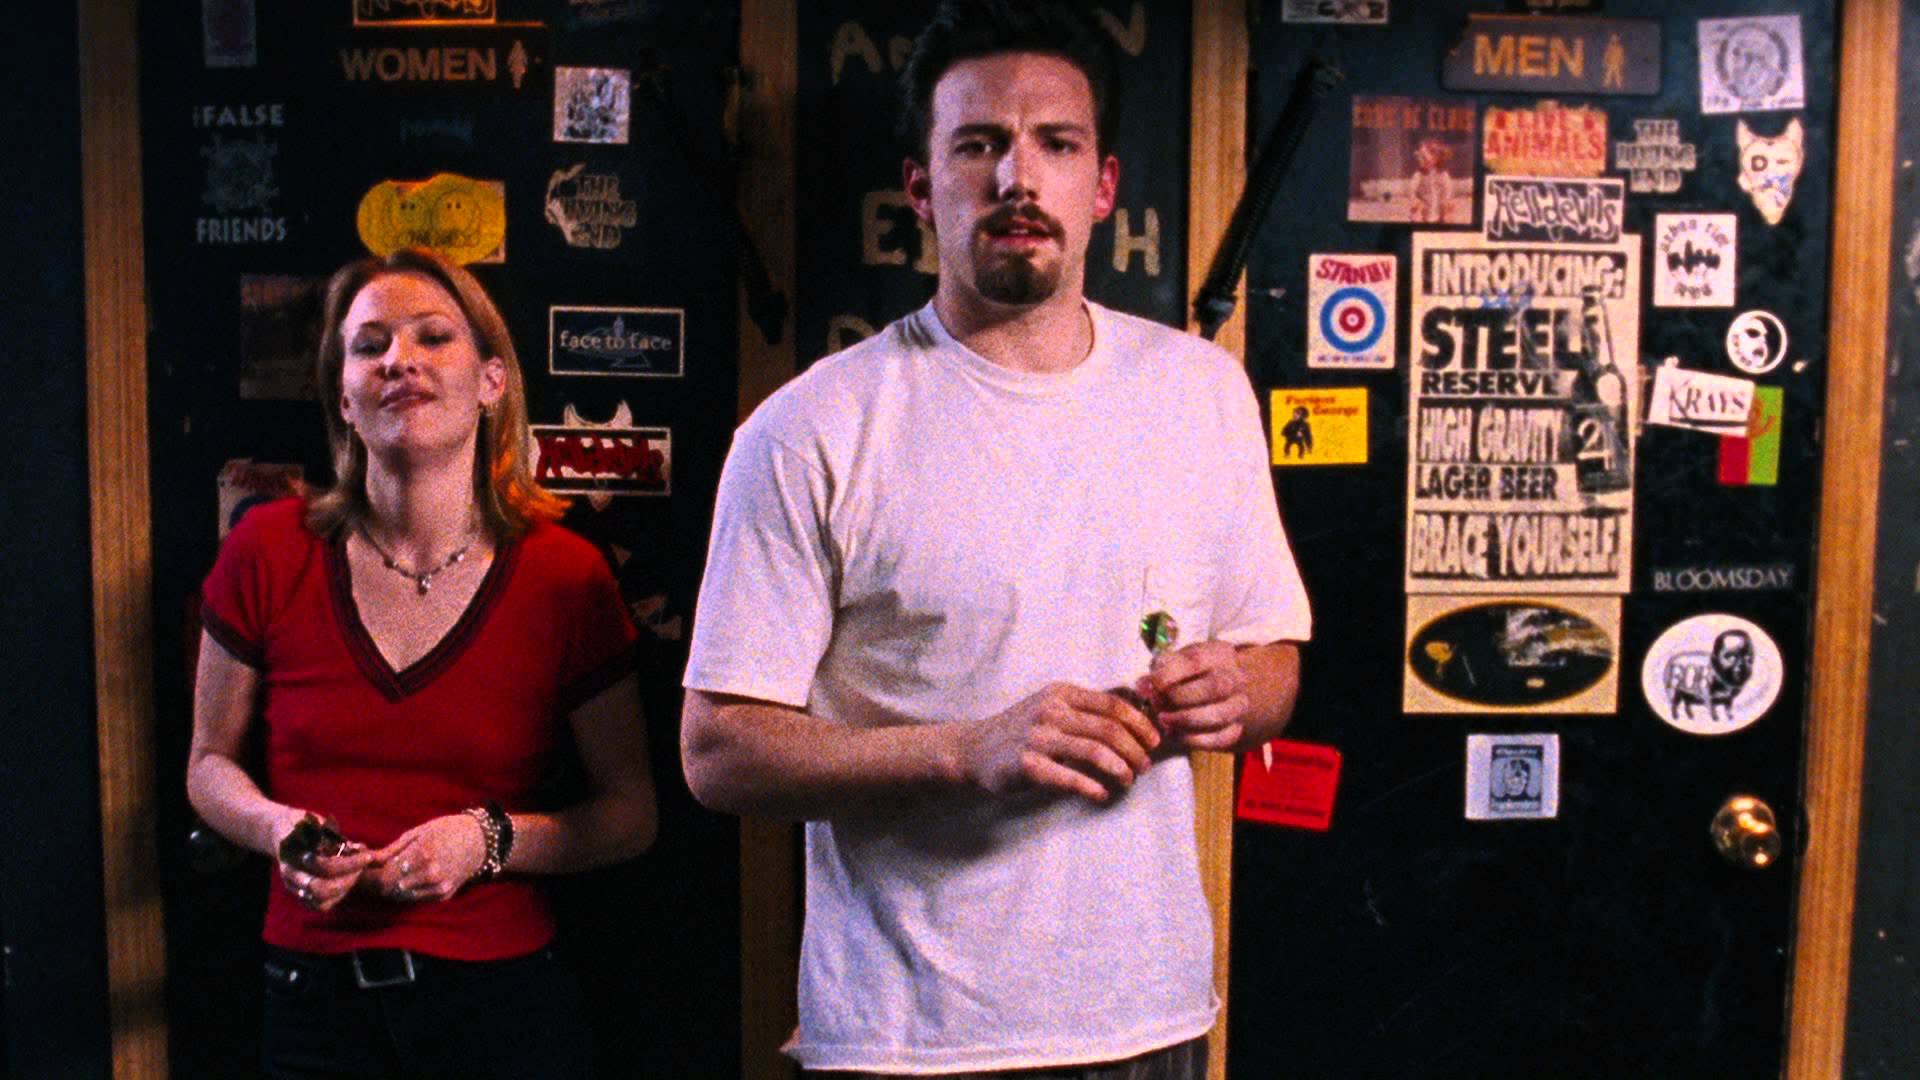 High Resolution Wallpaper | Chasing Amy 1920x1080 px